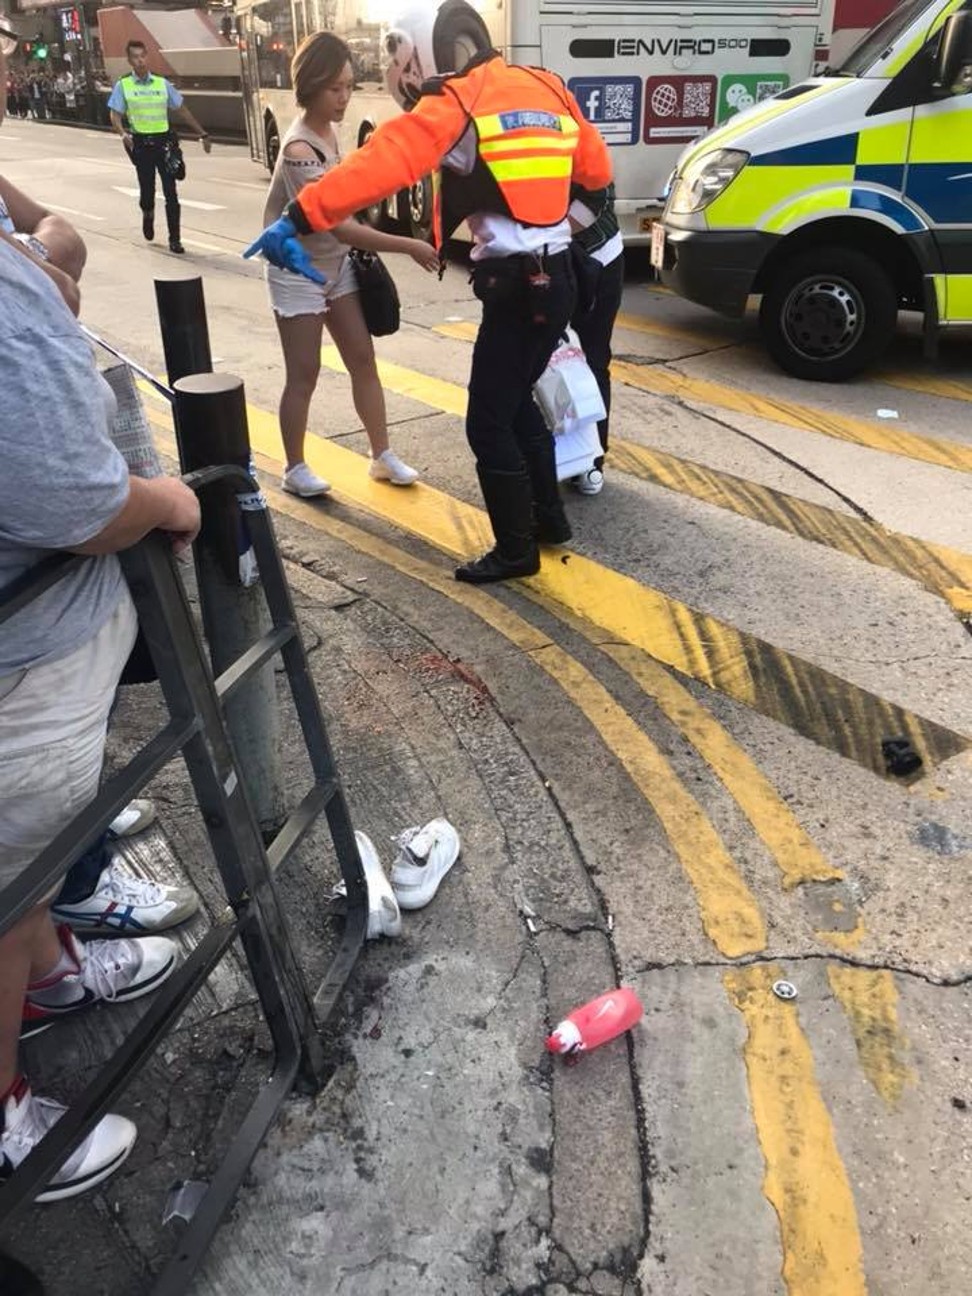 Police helping an injured pedestrian after the accident in Mong Kok in November 2017. Photo: Handout